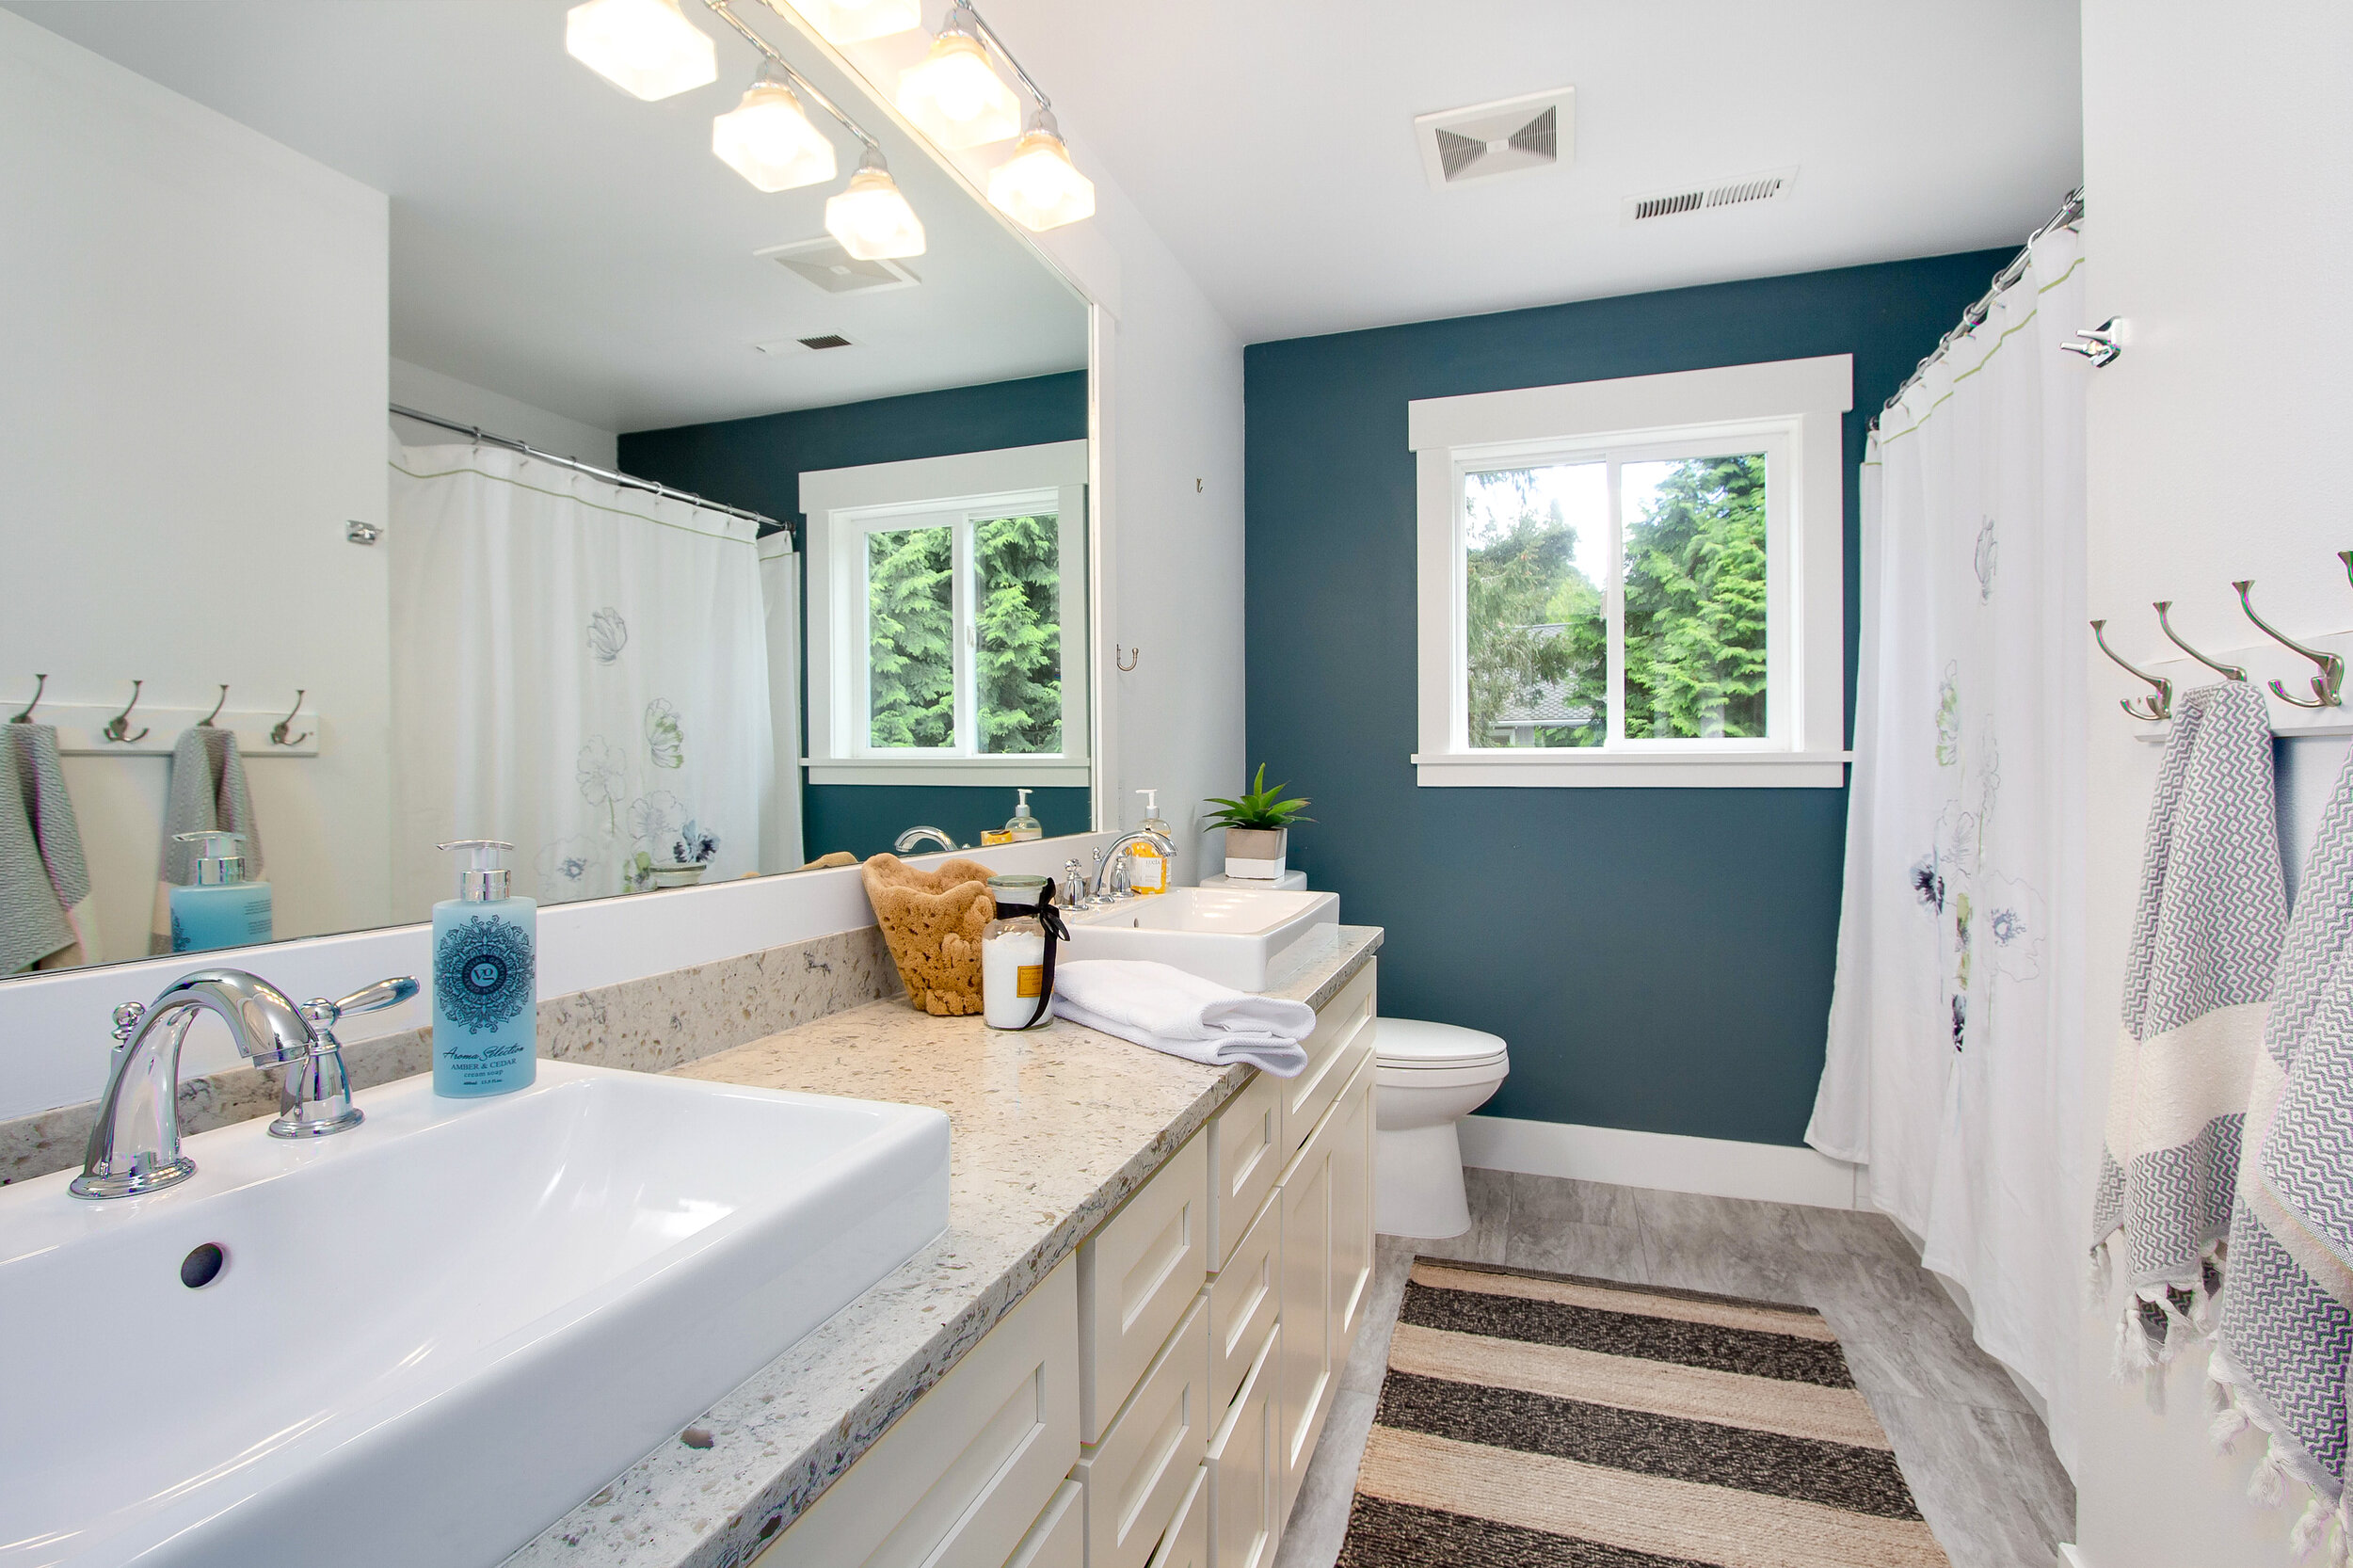  A second bath is equipped with dual sinks for the spare bedrooms to share.&nbsp; 